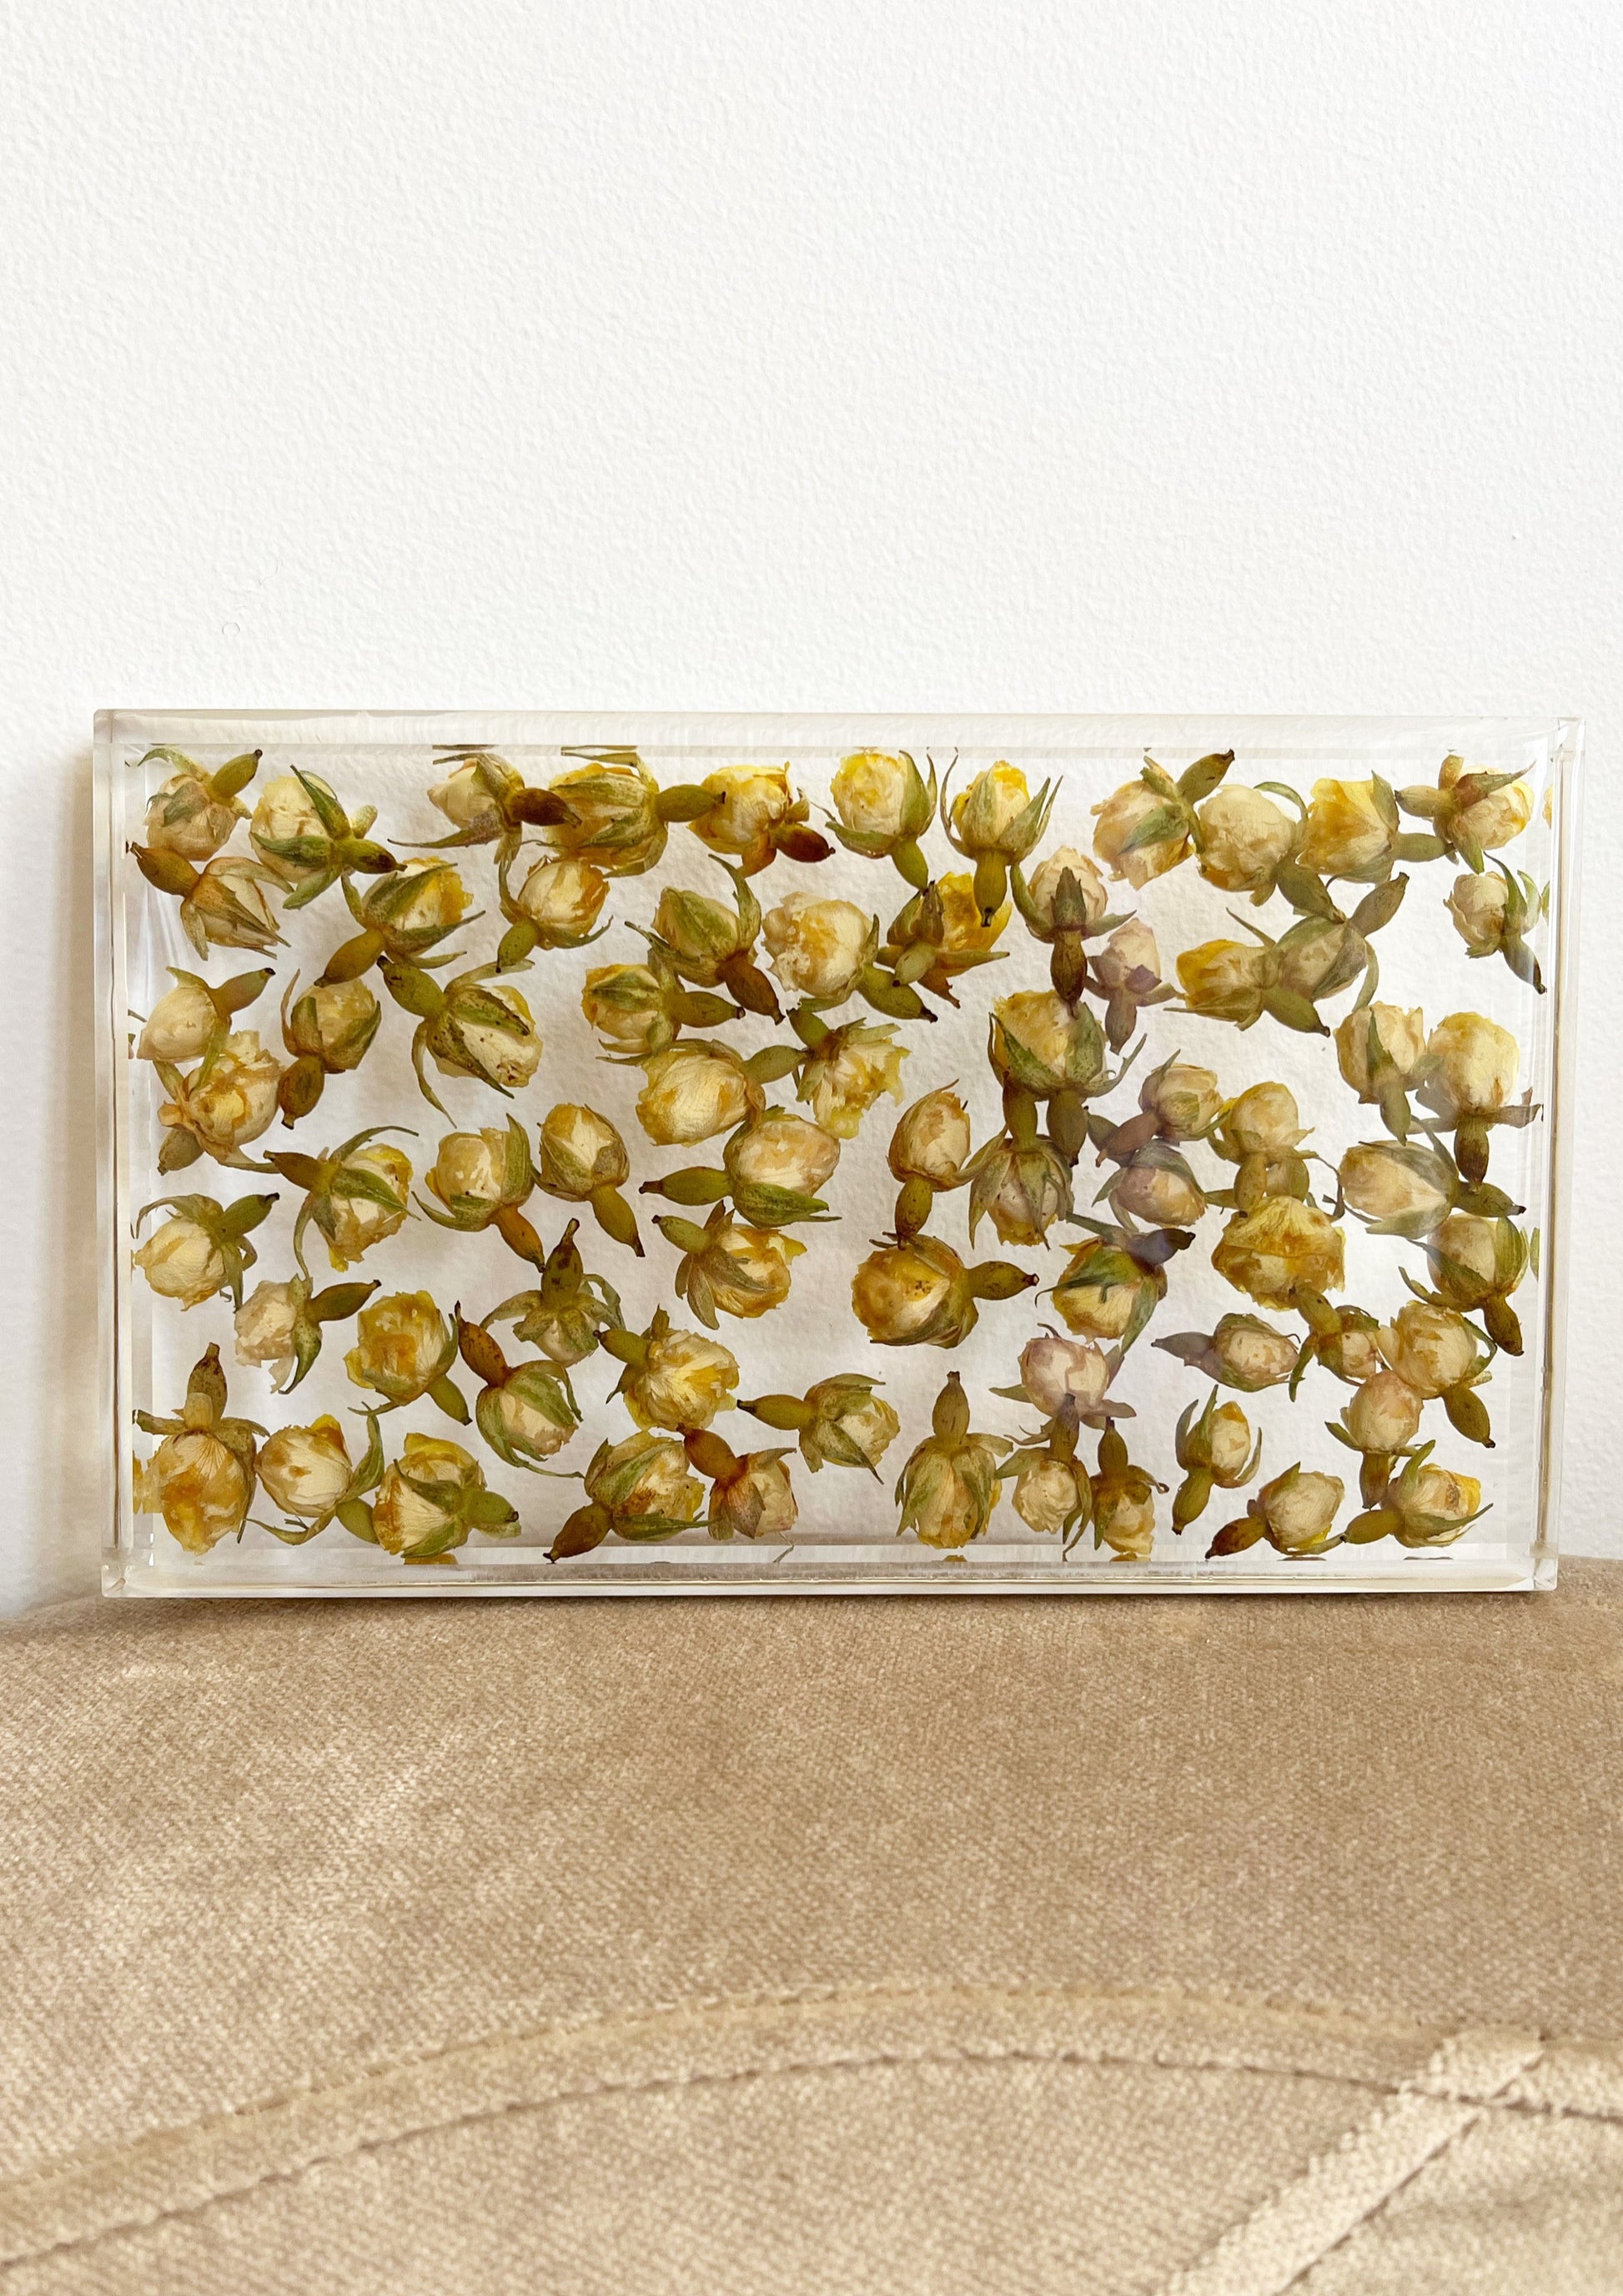 Dozens of tea roses sit suspended in transparent resin. A durable-yet-whimsical addition to your home decor. Serve cocktails, use as a vanity tray, or simply display as an incredible objet d'art.